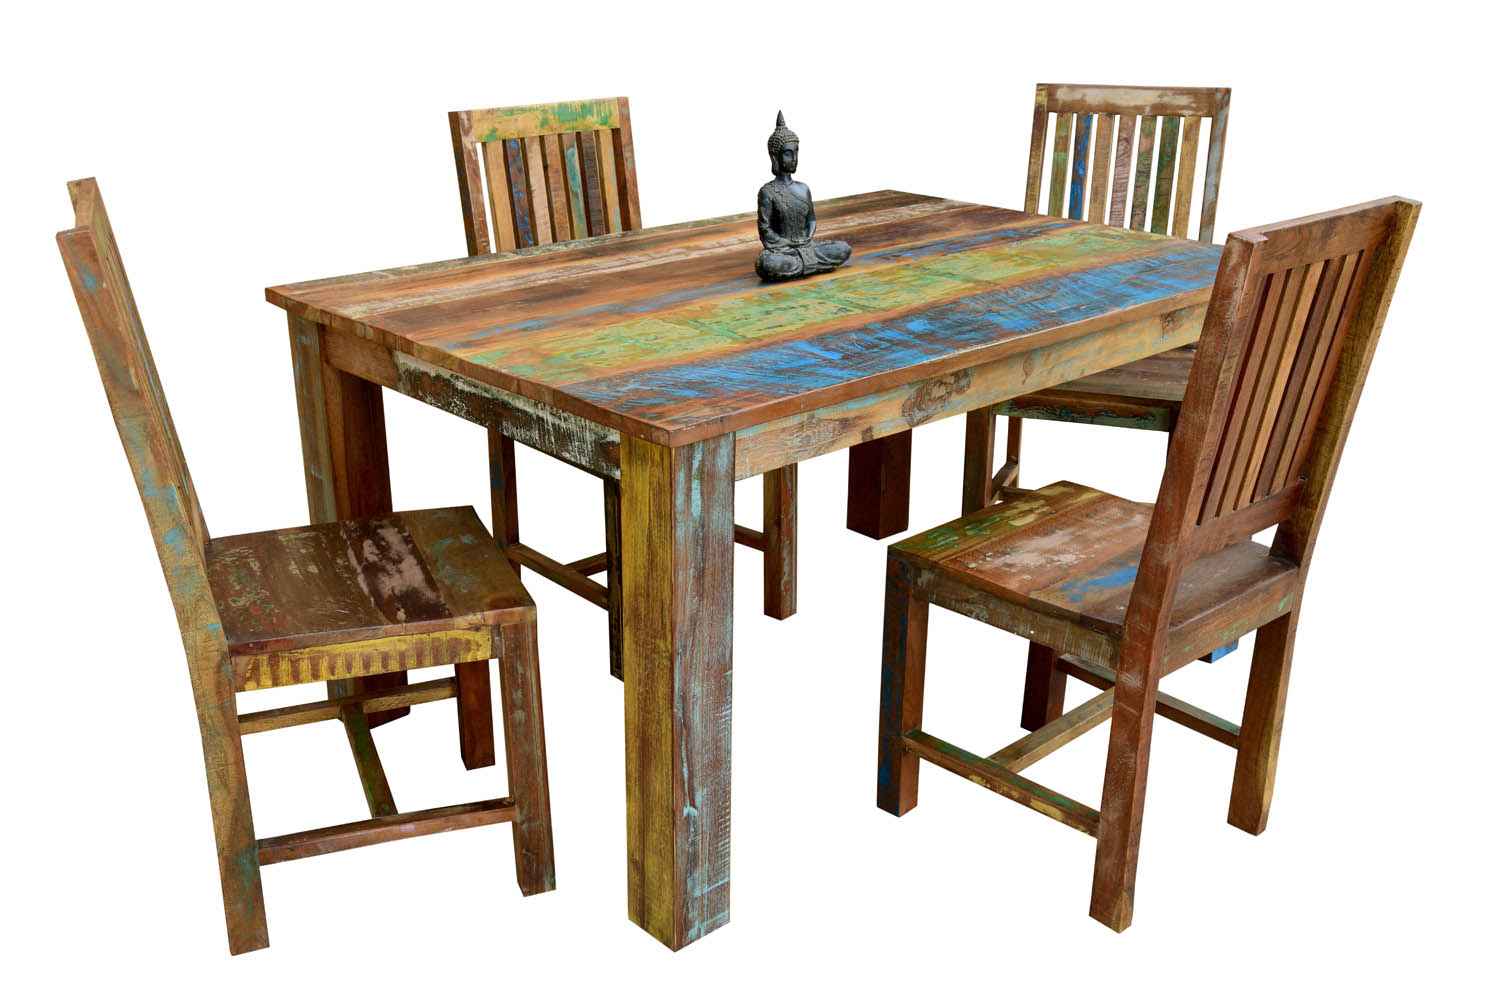 Buy Nolan reclaimed 4 seater wooden dining table | Dining Room, 4